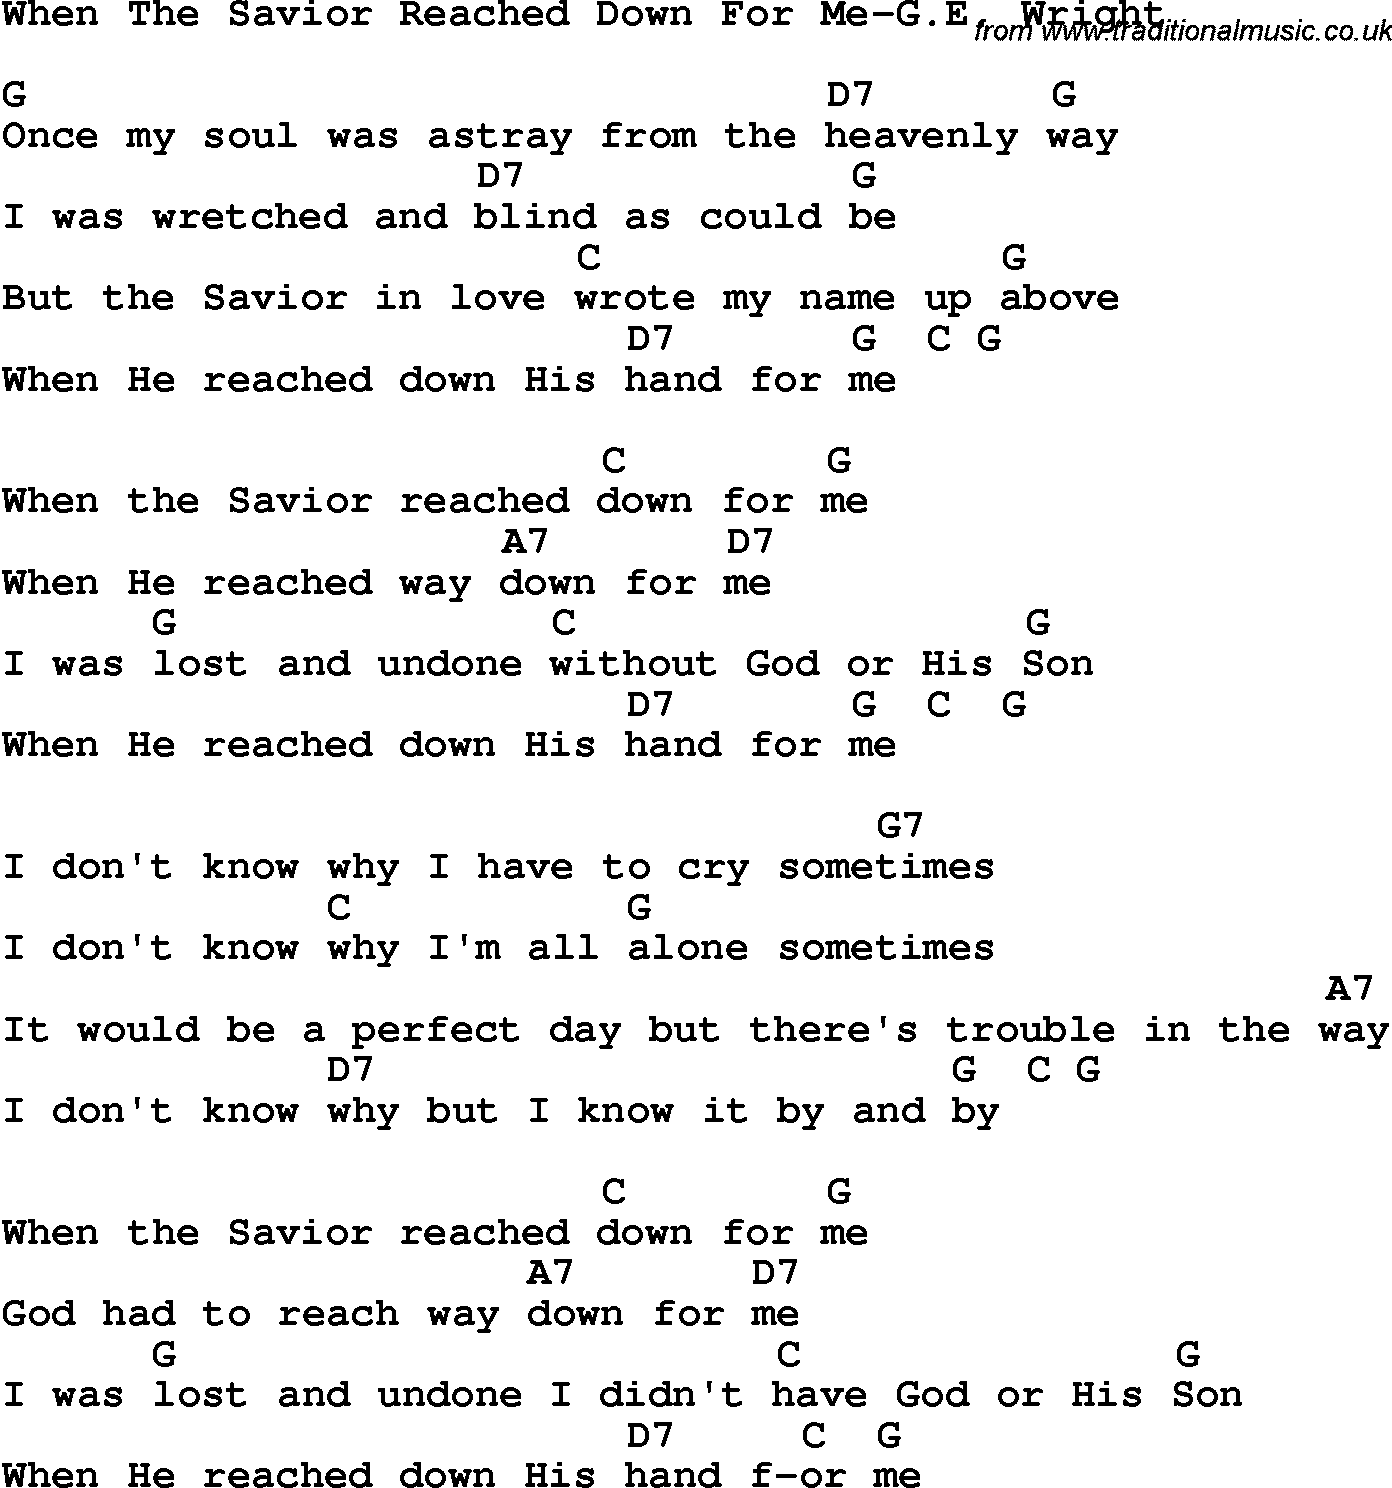 Country, Southern and Bluegrass Gospel Song When The Savior Reached Down For Me-G E Wright lyrics and chords